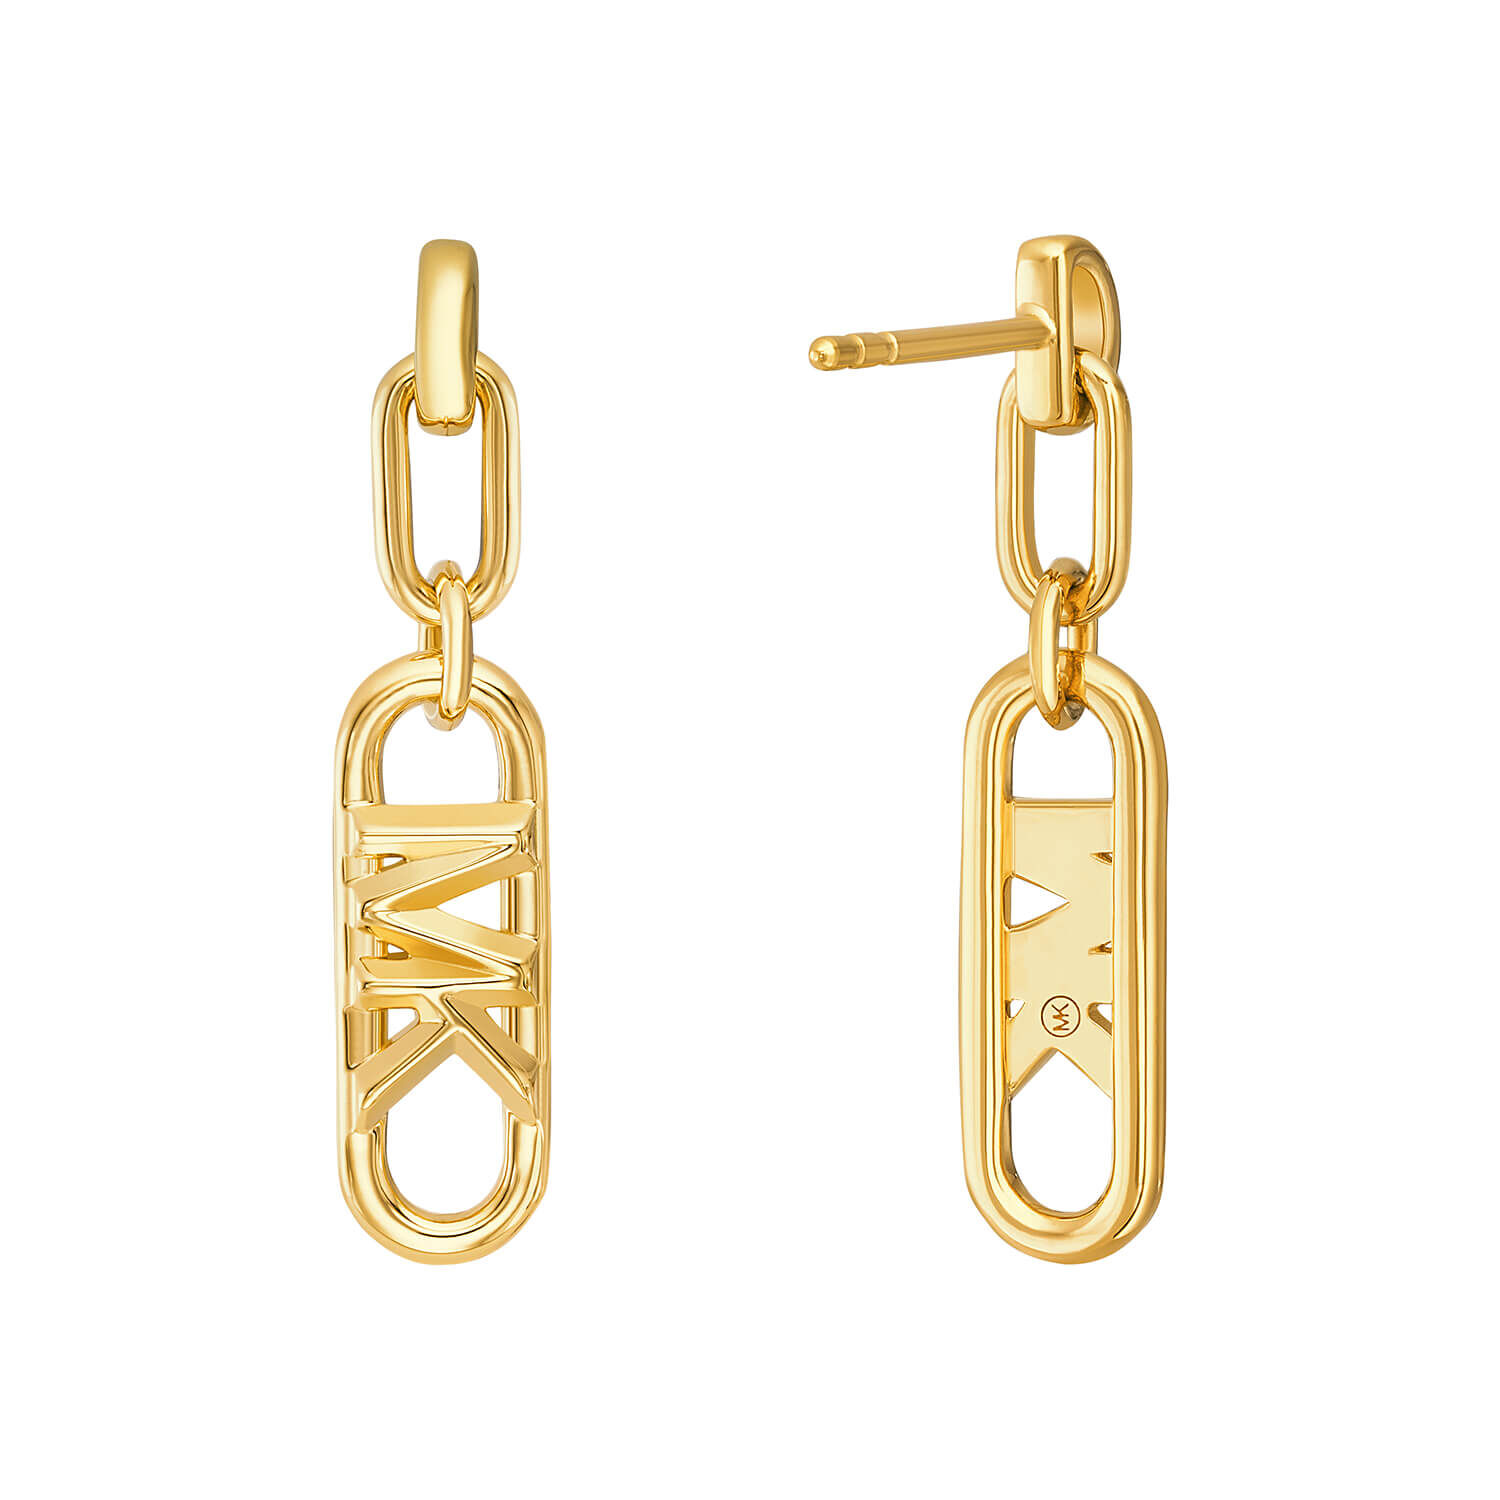 Michael Kors Yellow Gold Plated Crystal Stud Earrings MKC1496AN710   Goldsmiths